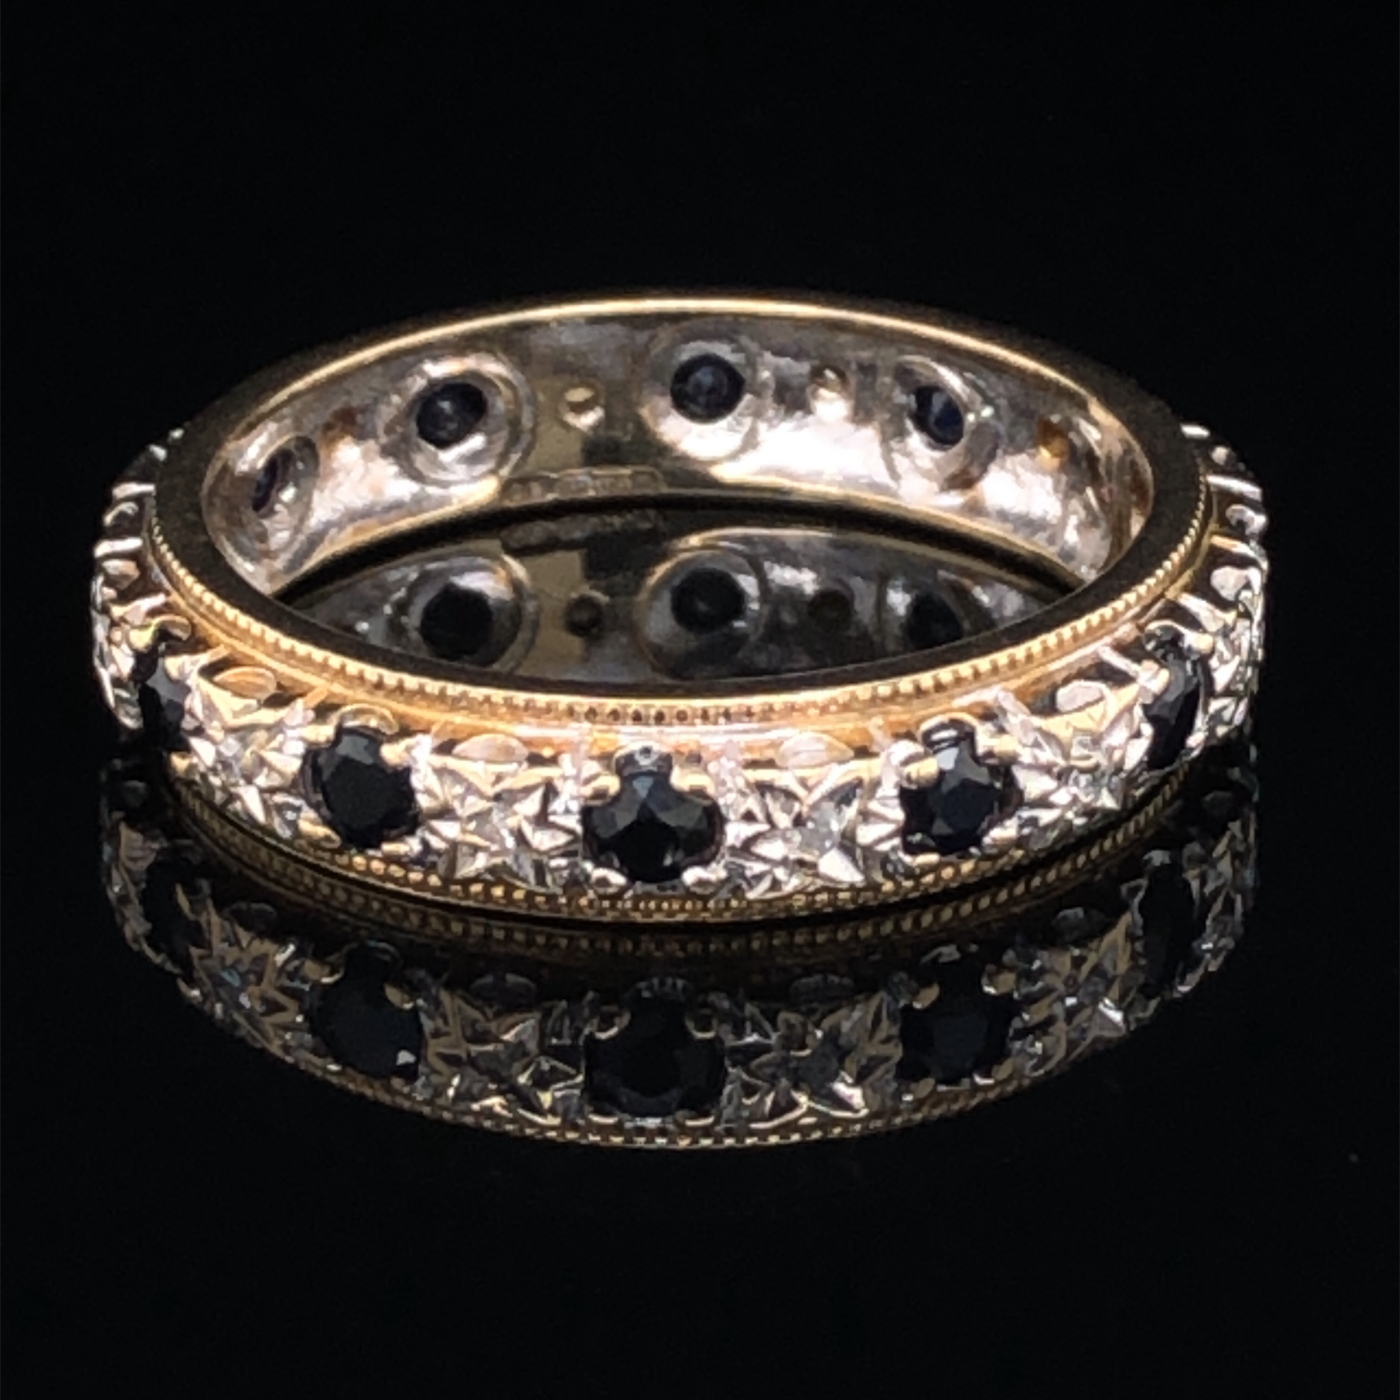 A 9ct GOLD SAPPHIRE AND DIAMOND FULL ETERNITY RING, FINGER SIZE T. WEIGHT 4.6grms. - Image 2 of 2